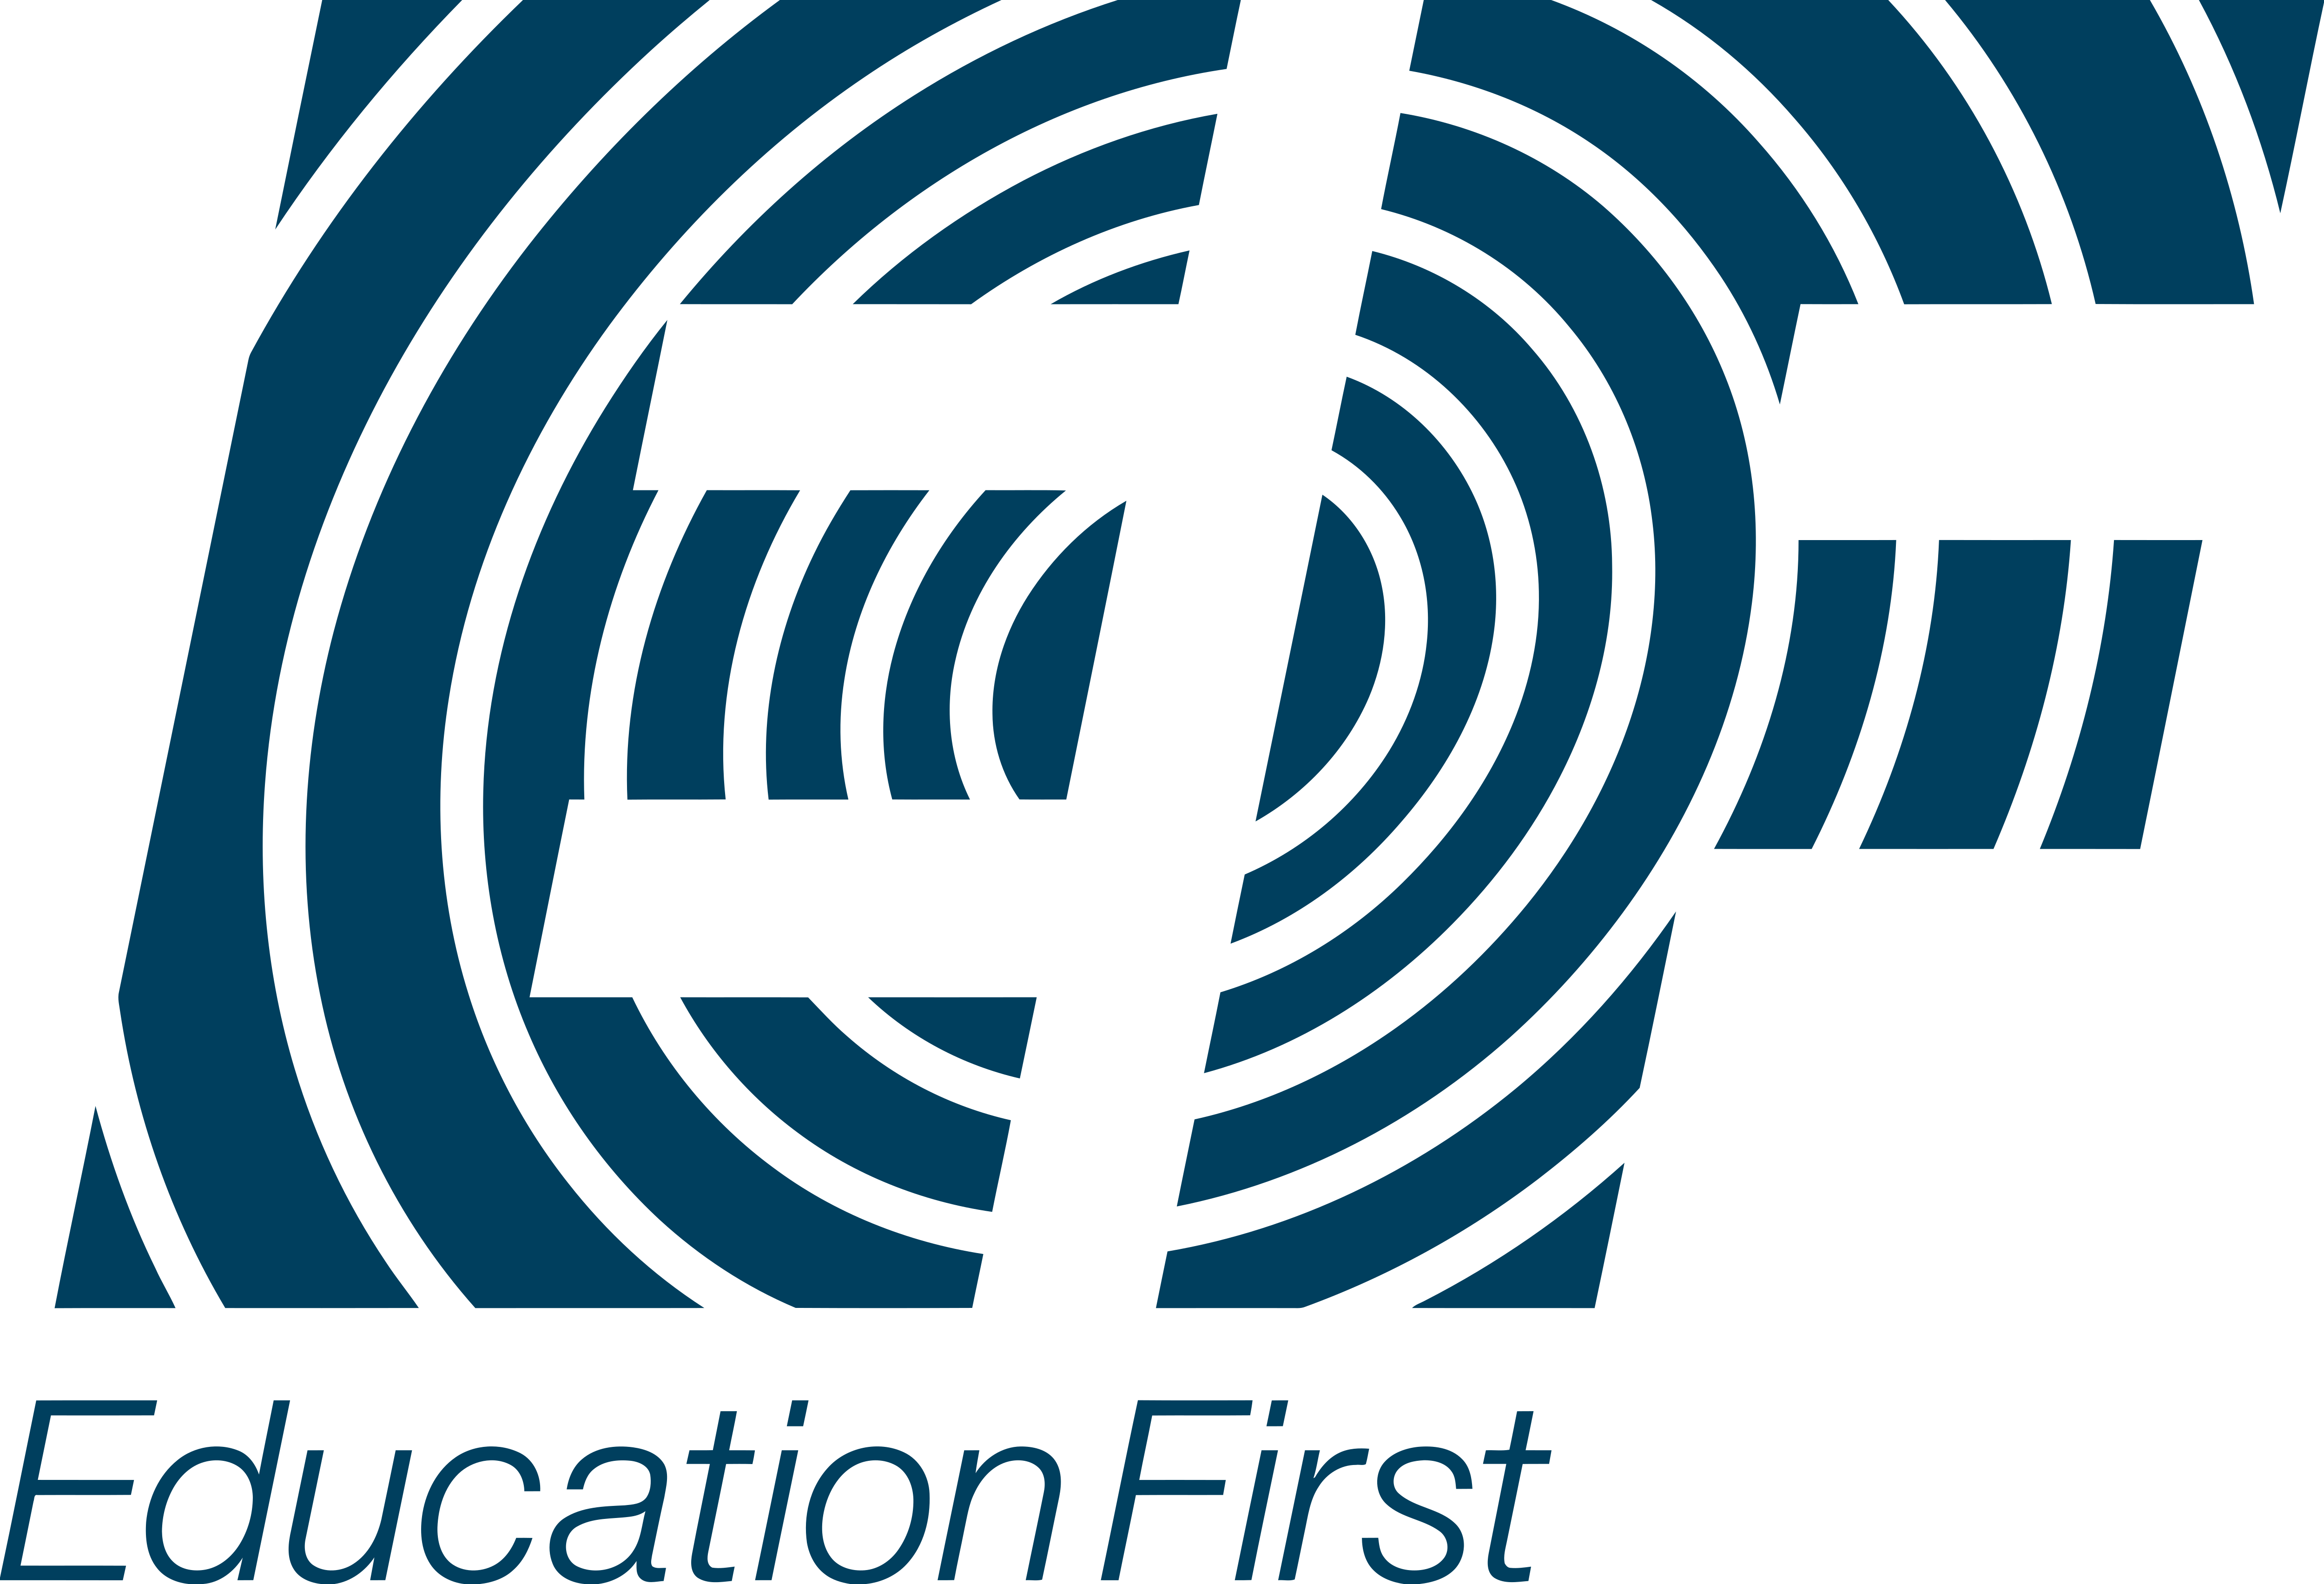 Education First Logos Download